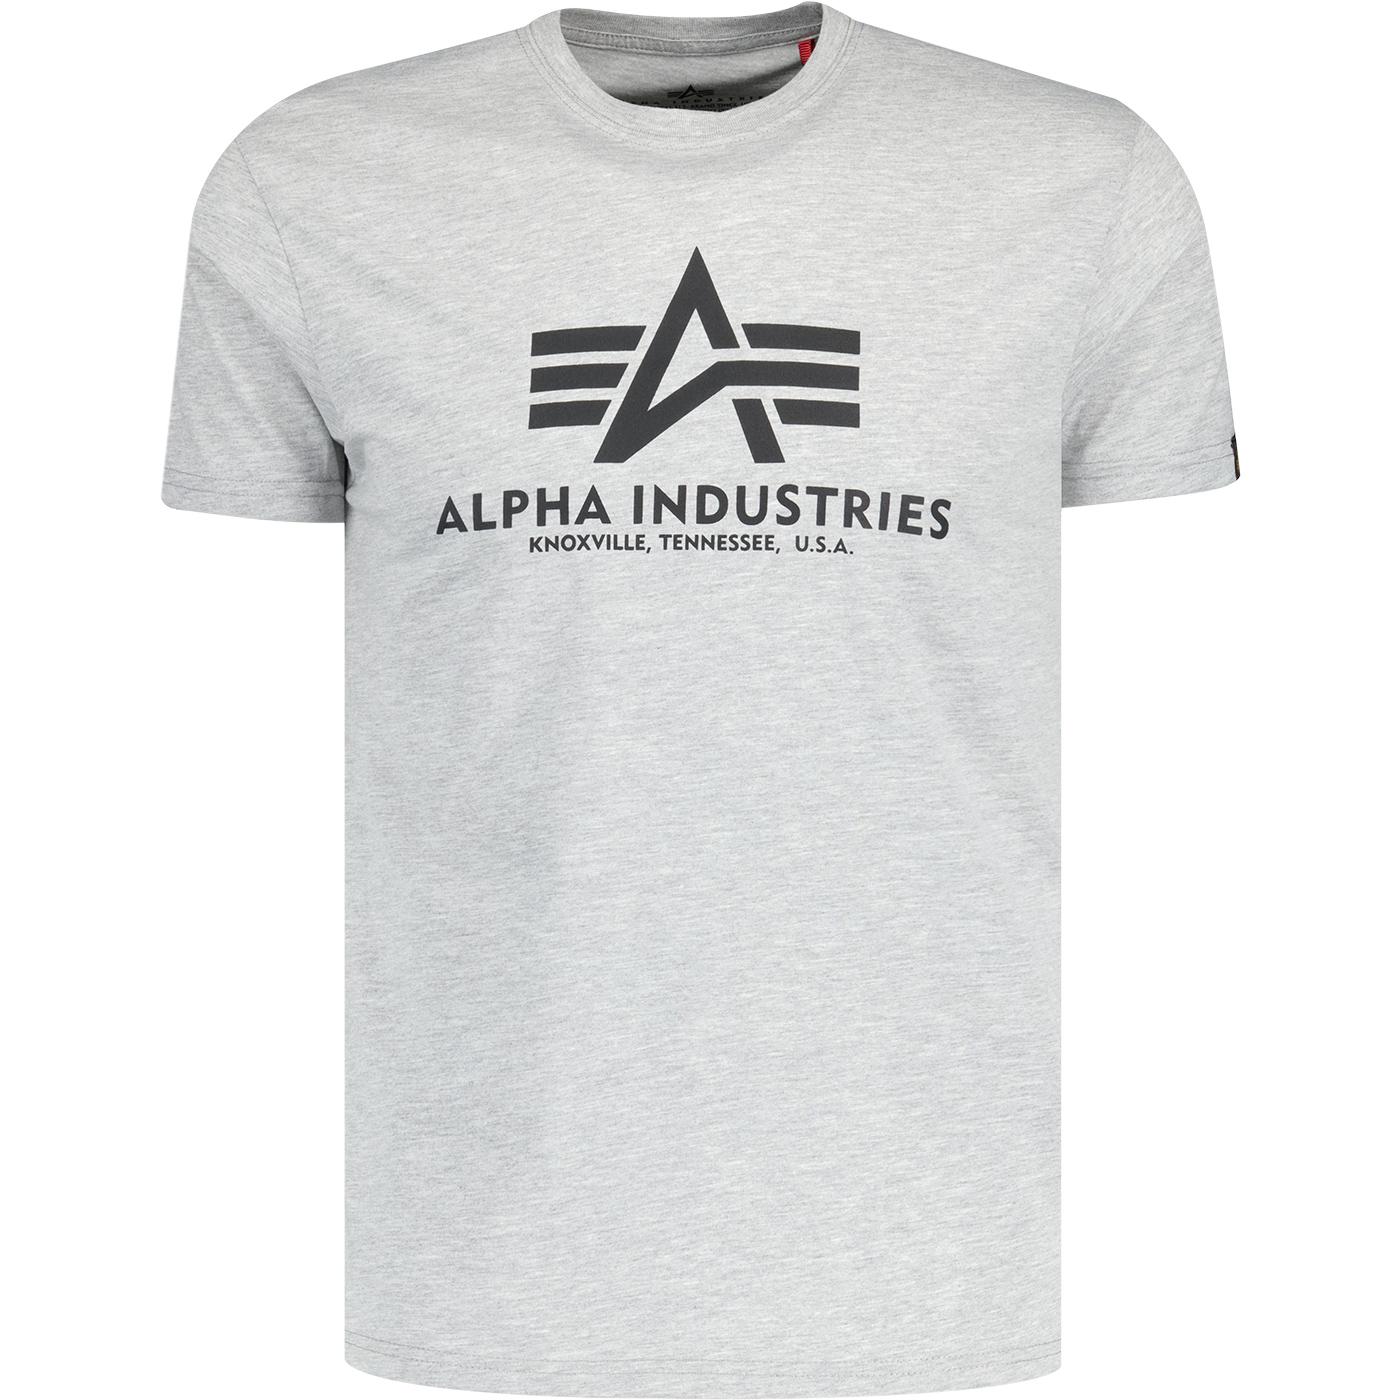 Alpha 2 Logo and Pack Industries Blue Tee Grey in Basic